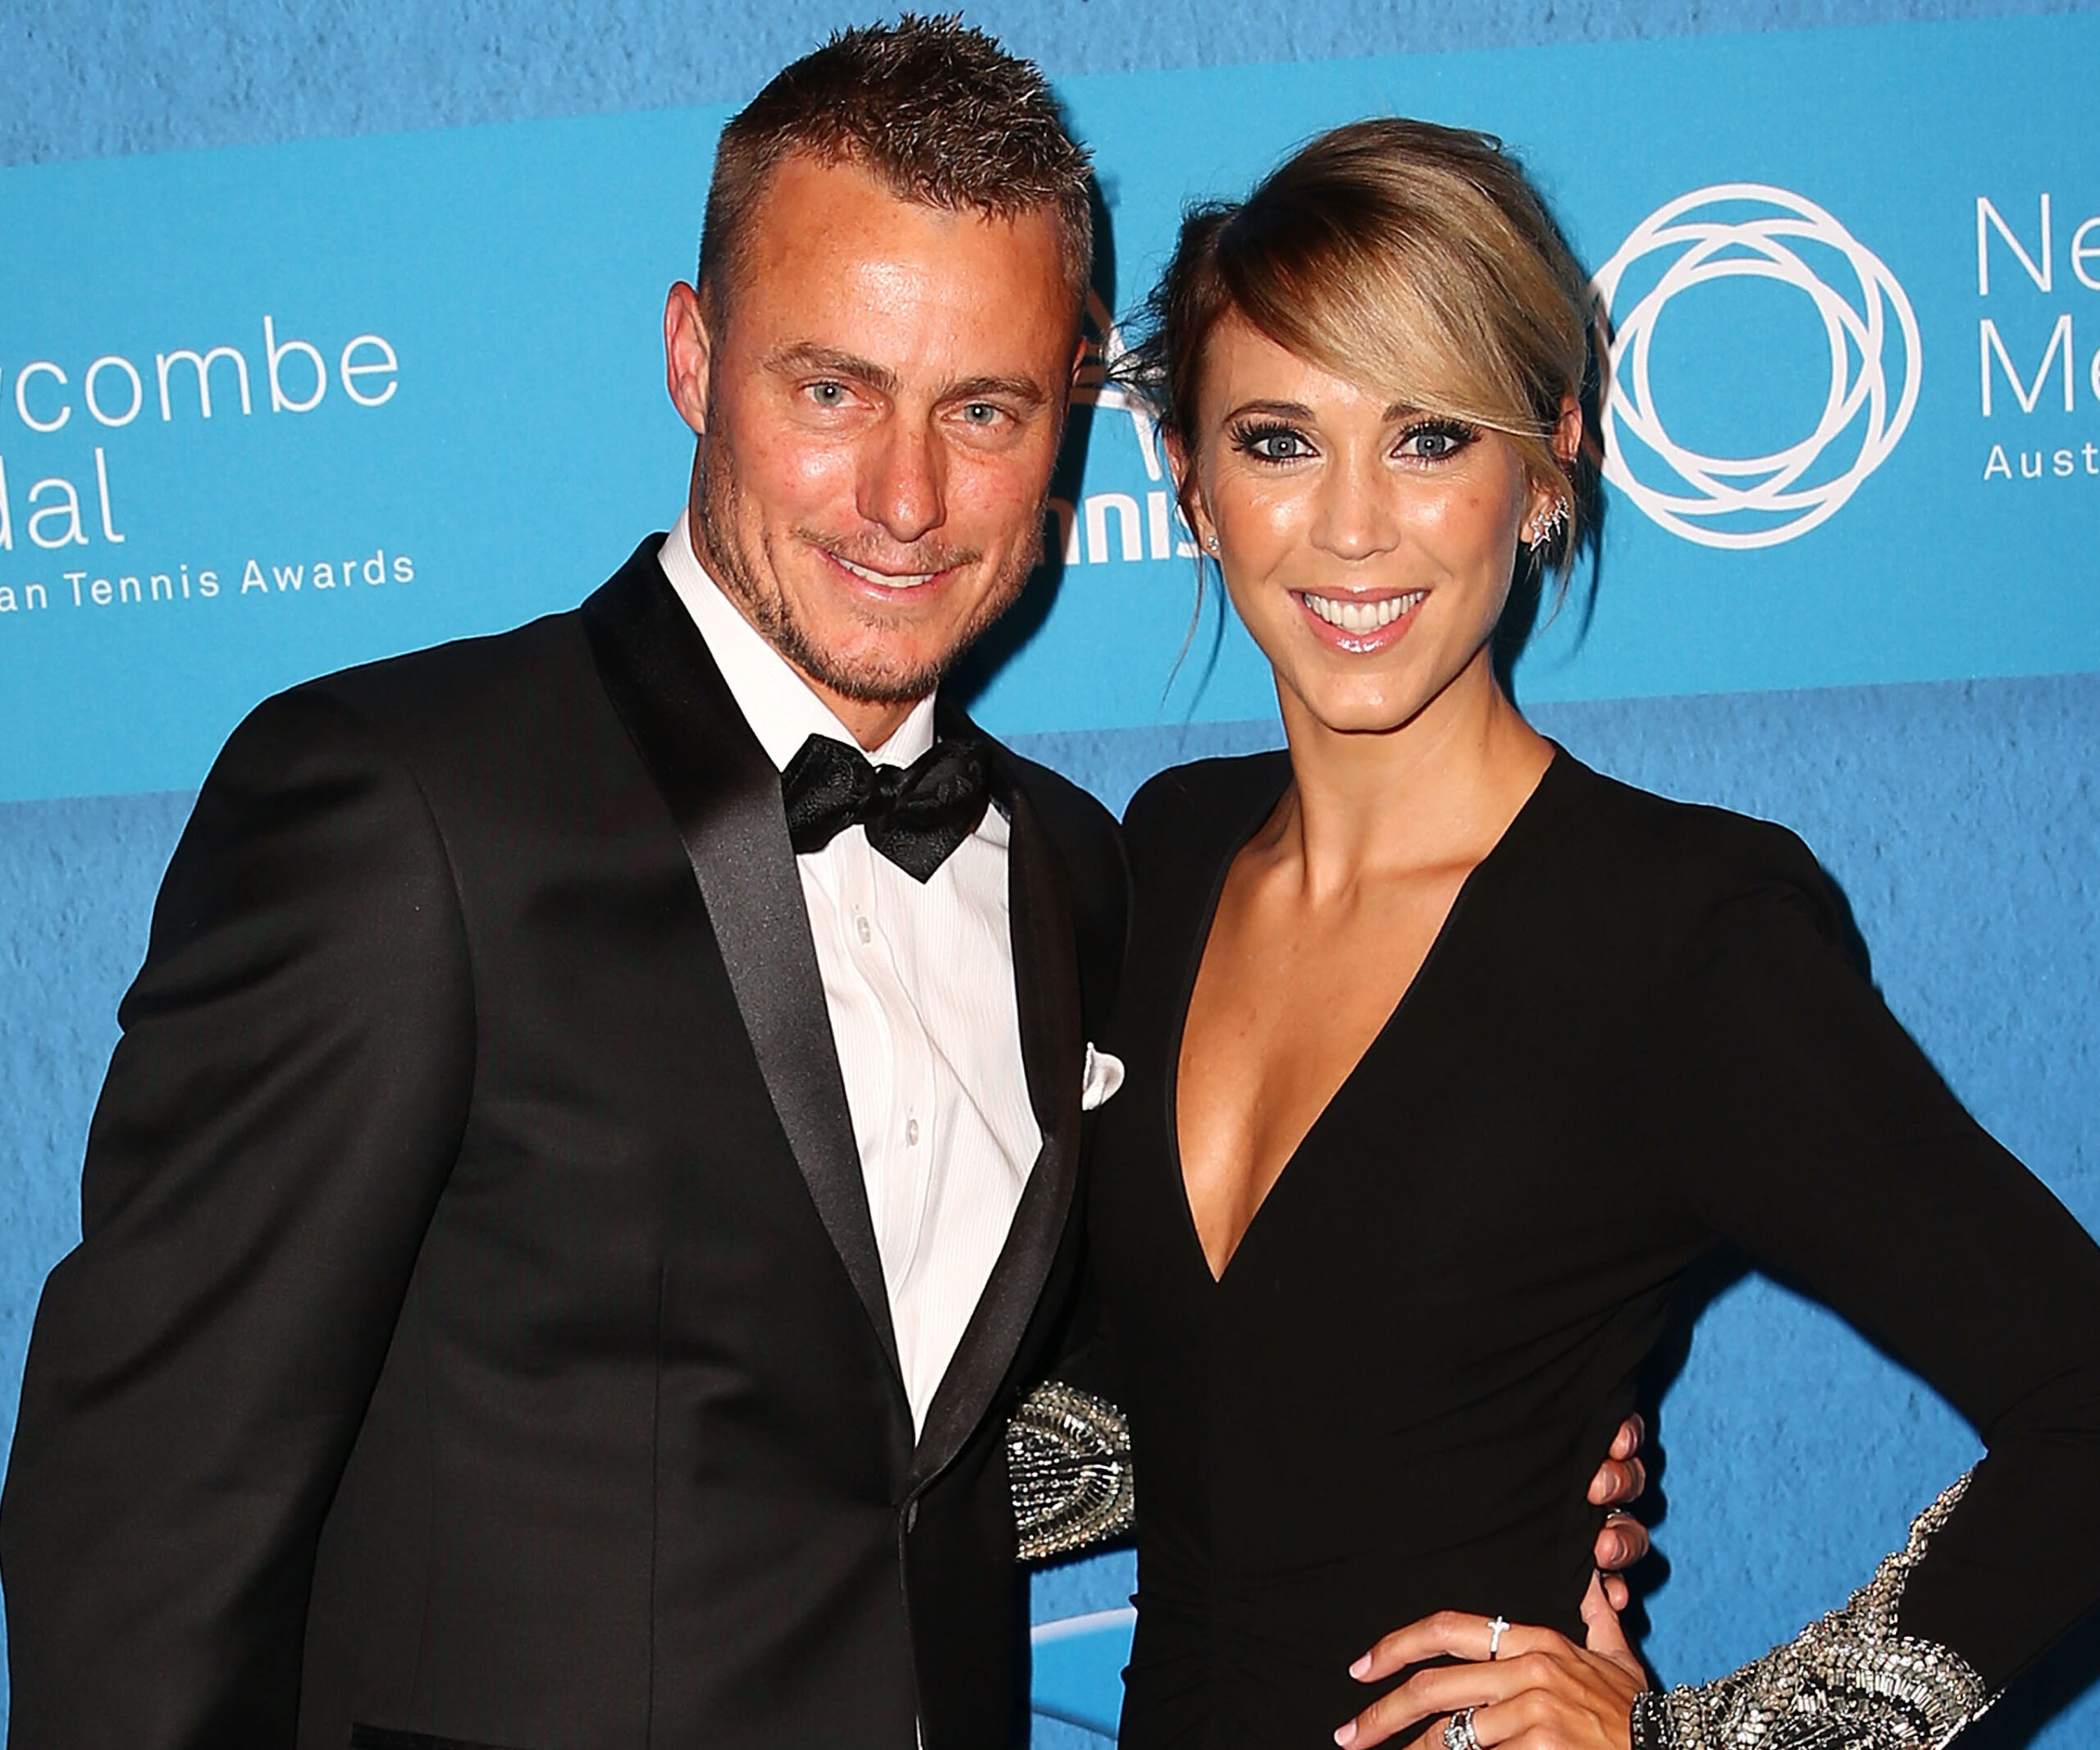 Bec and Lleyton Hewitt: Our life after tennis